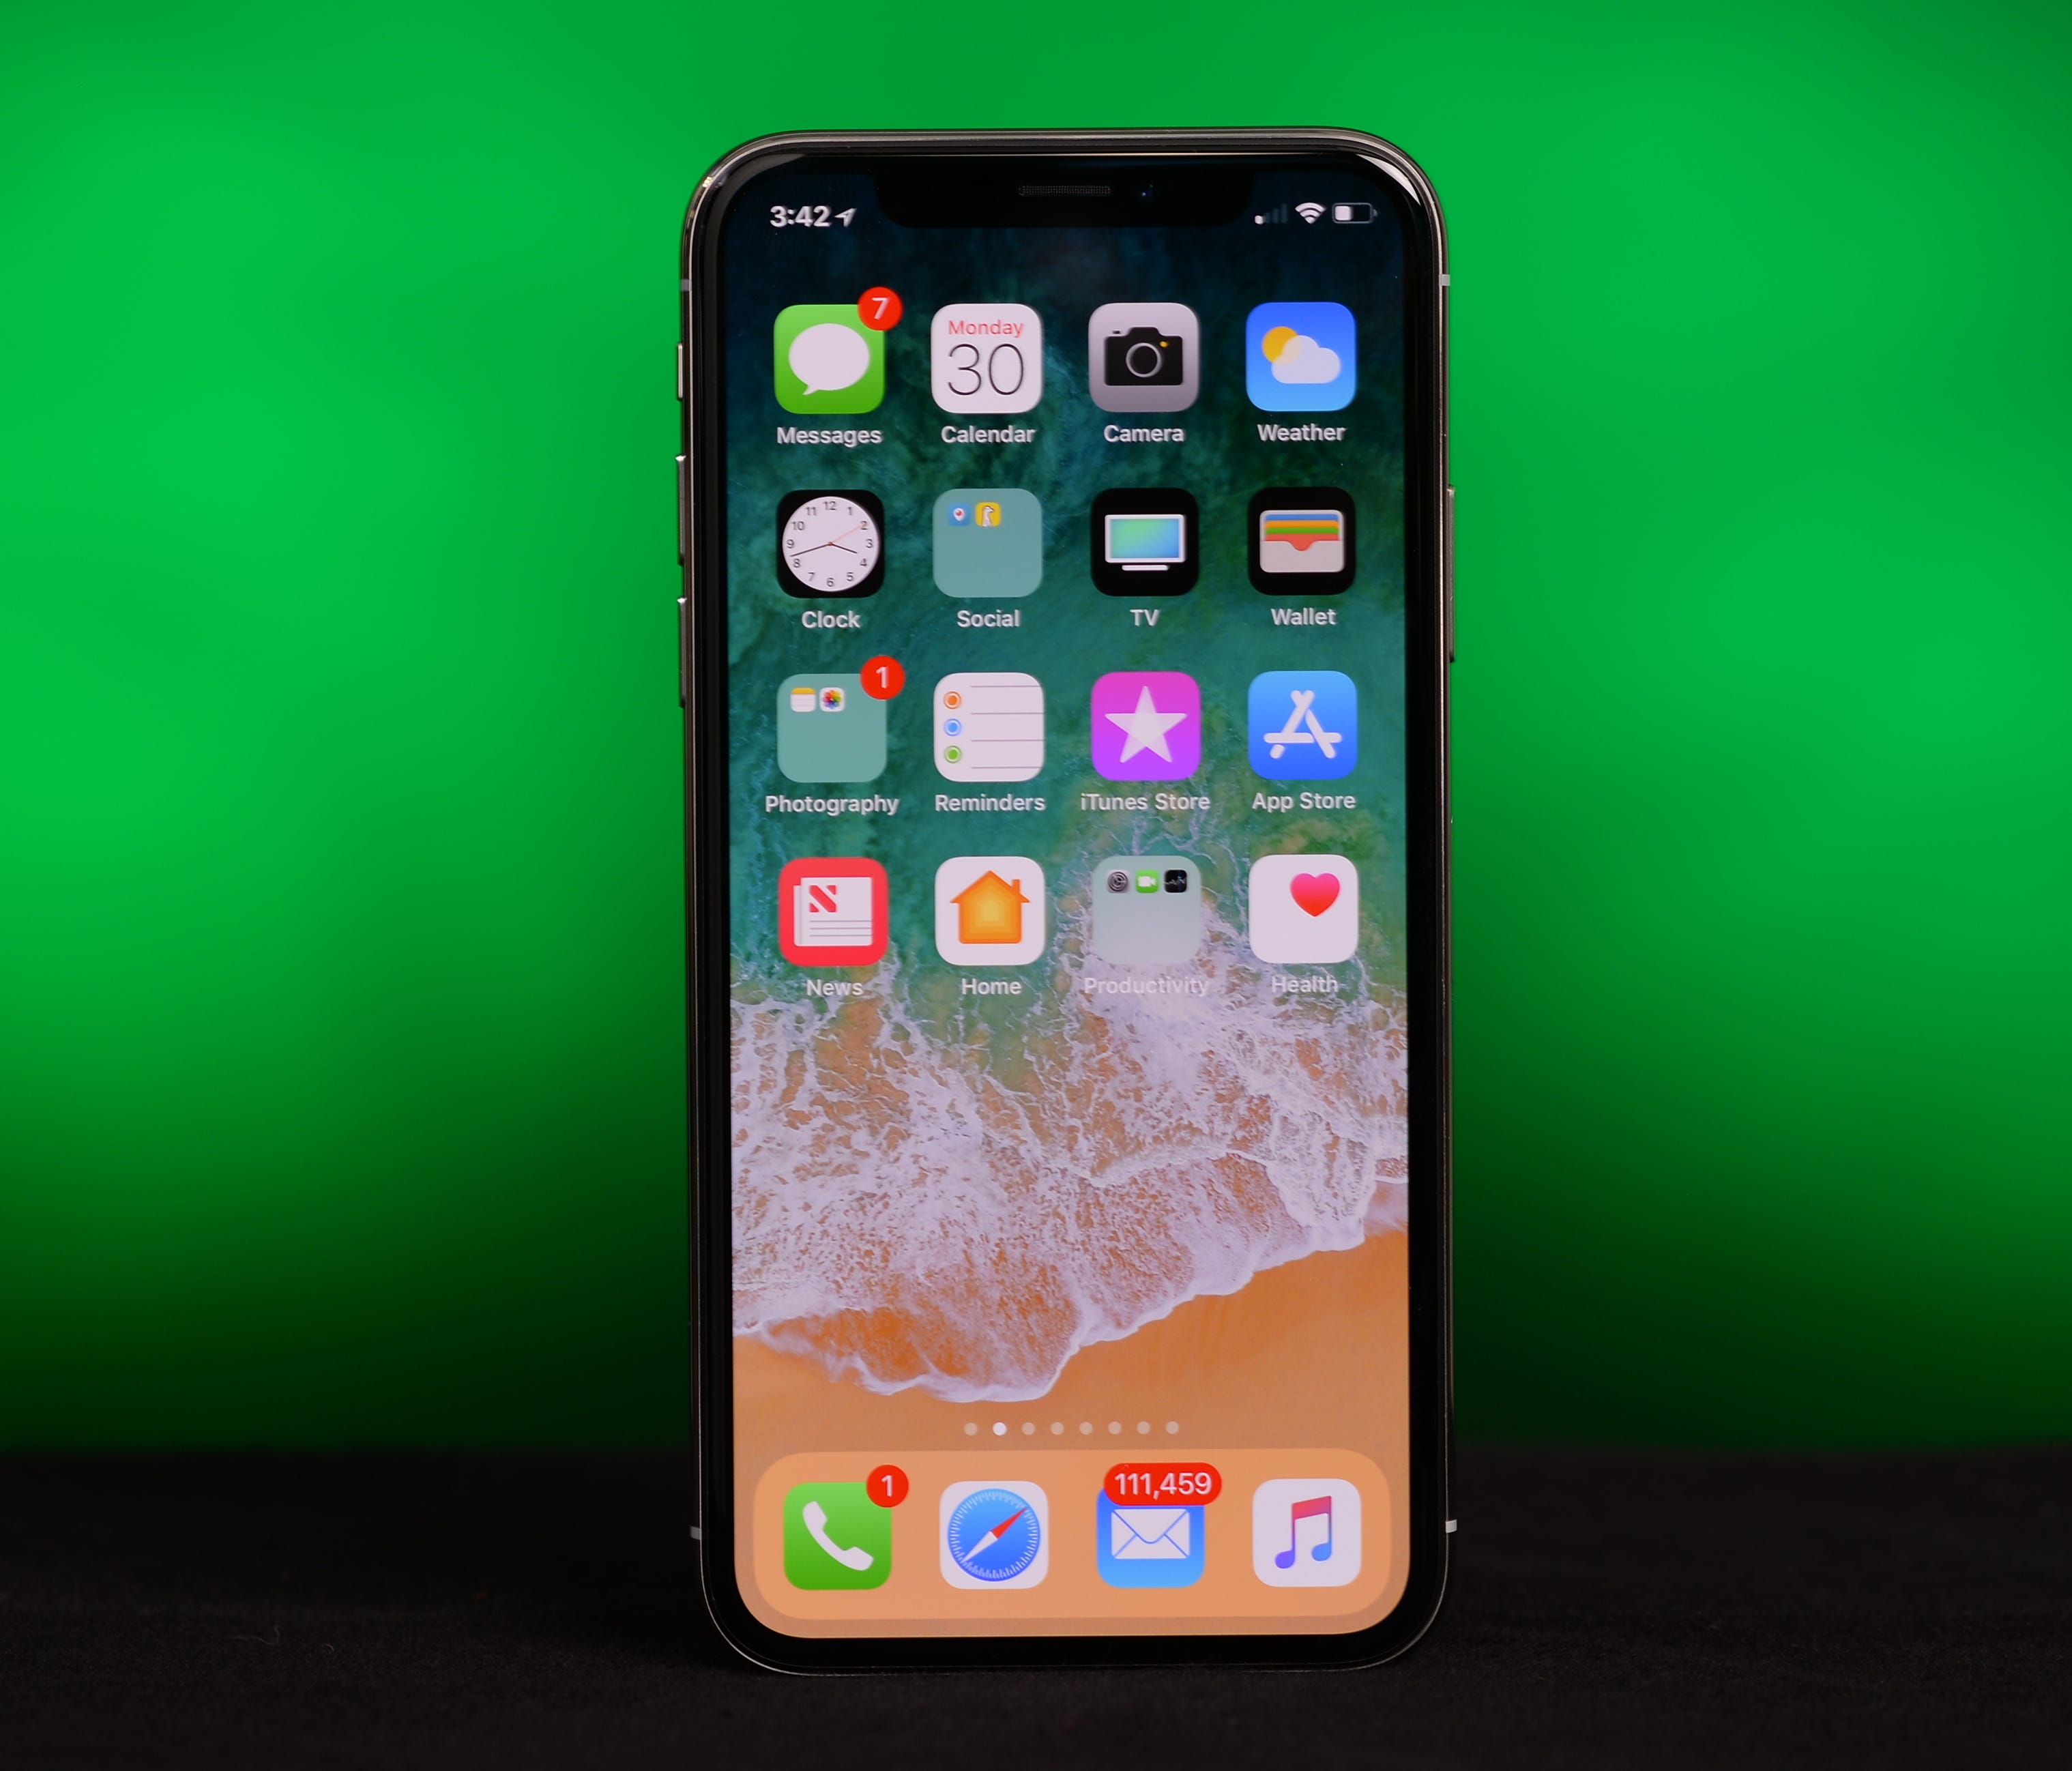 The iPhone X lacks a home button.